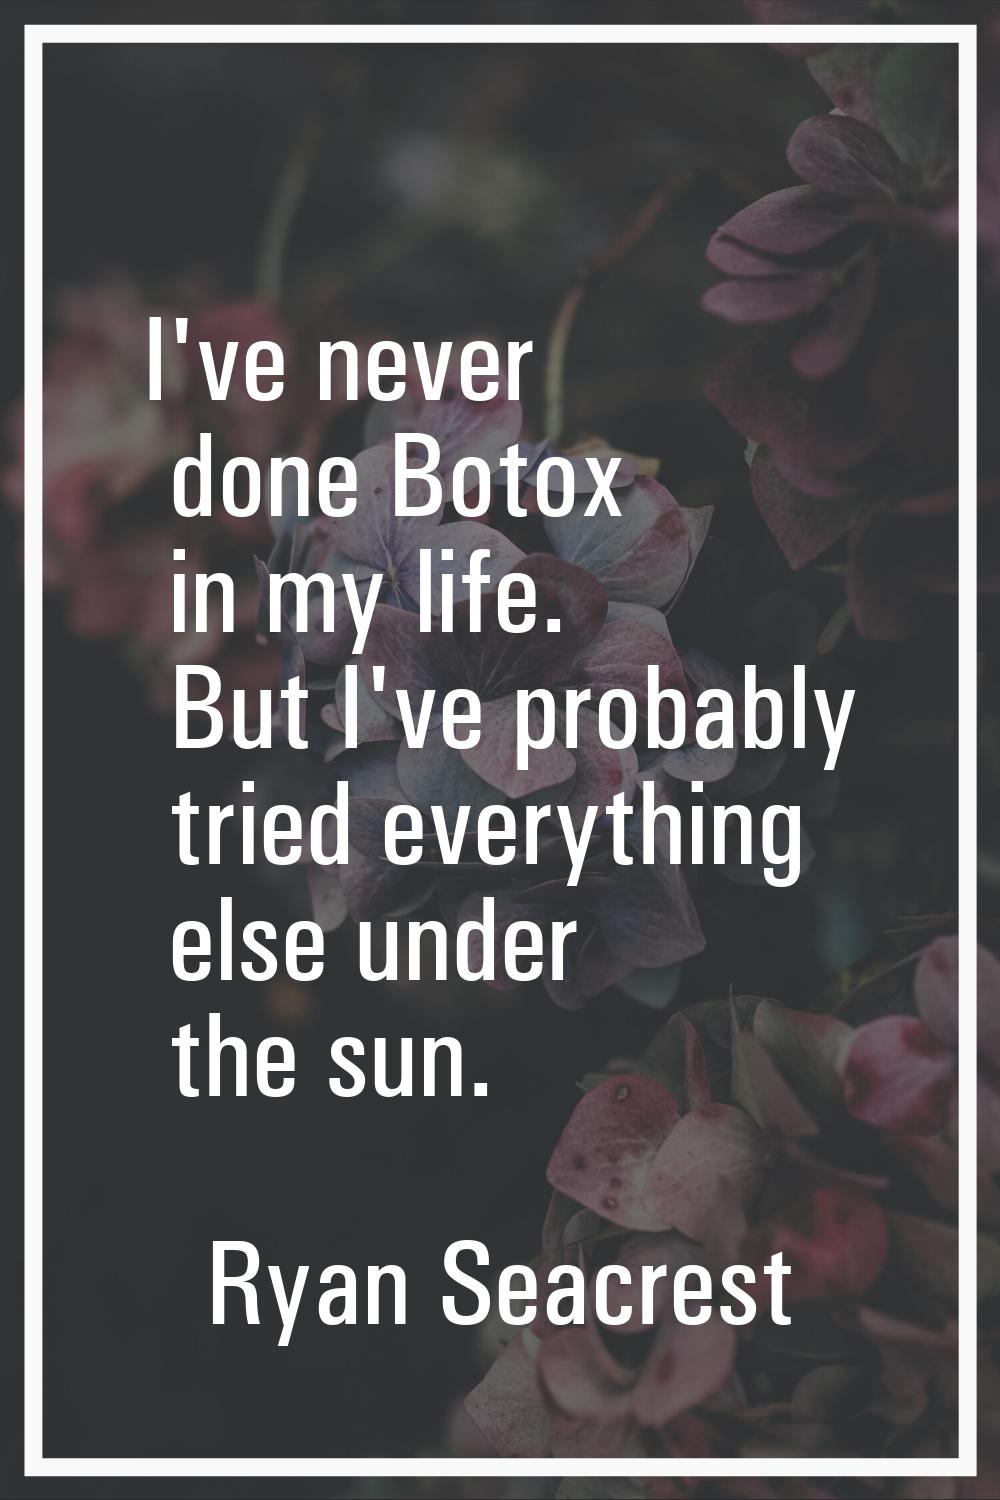 I've never done Botox in my life. But I've probably tried everything else under the sun.